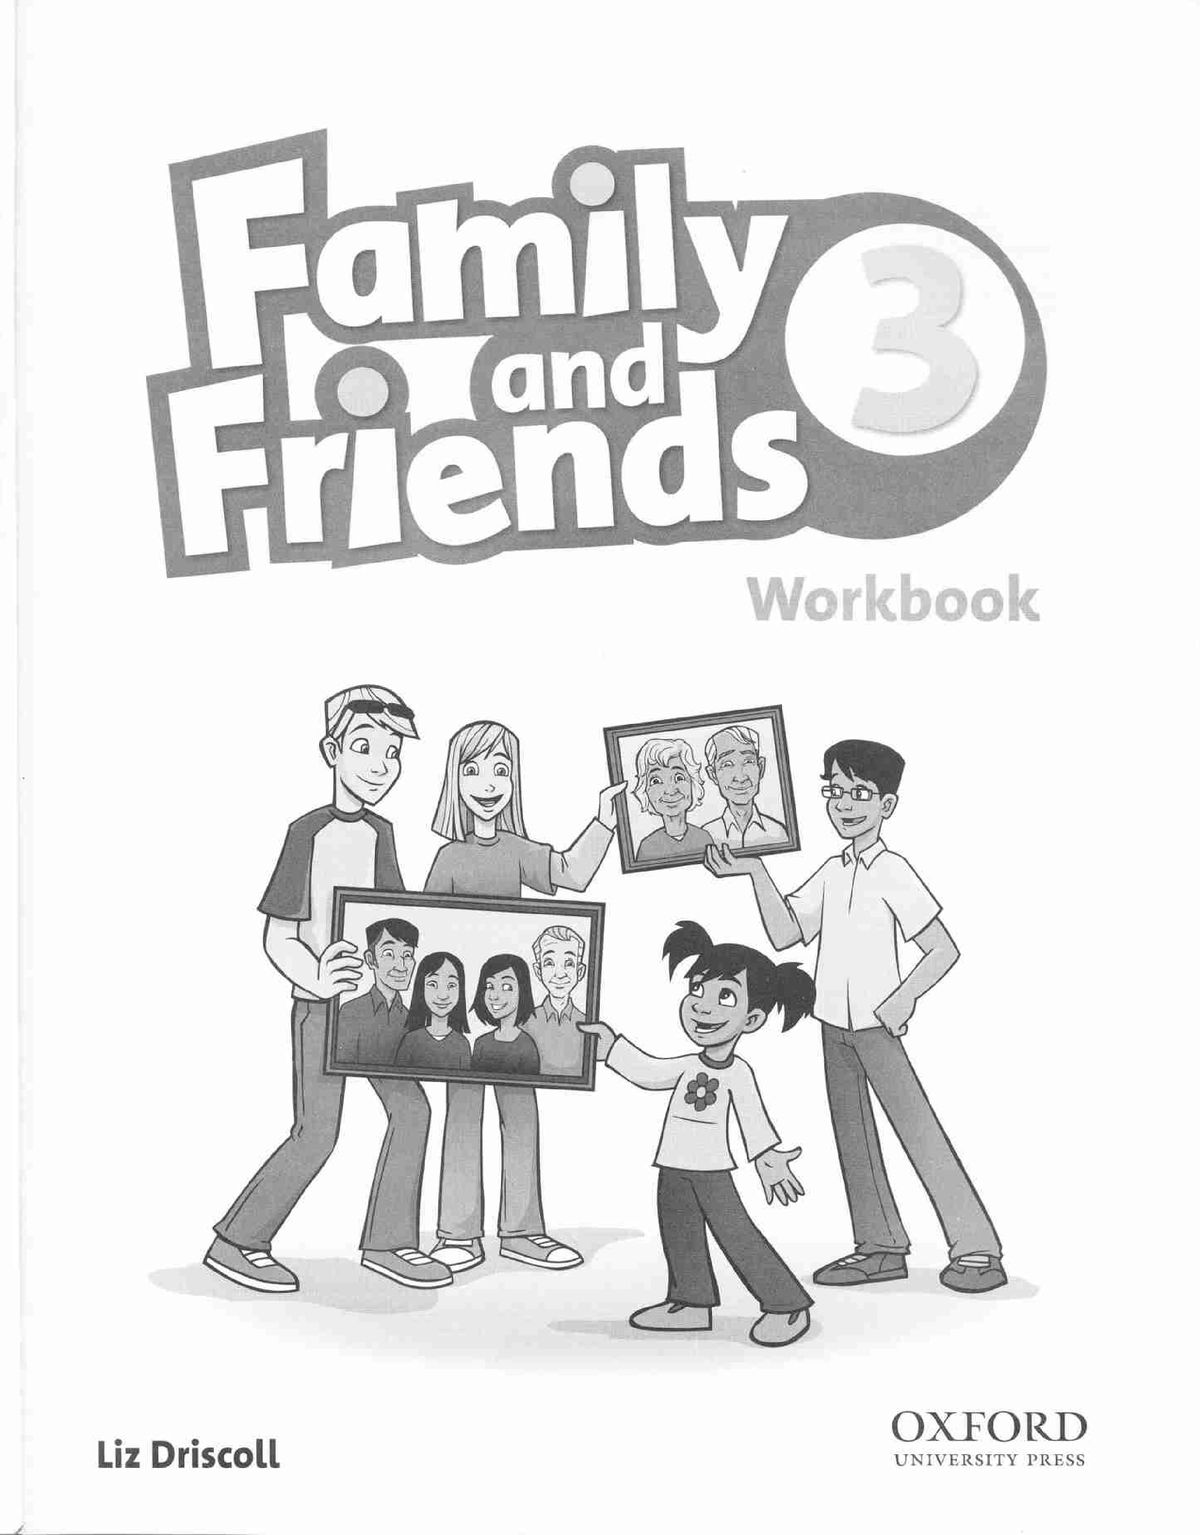 Family and friends 3 Workbook. Family and friends 3 Workbook Оксфорд Liz Driscoll. Family and friends 6 класс. Family and friends 4 Workbook. Workbook 3 unit 3